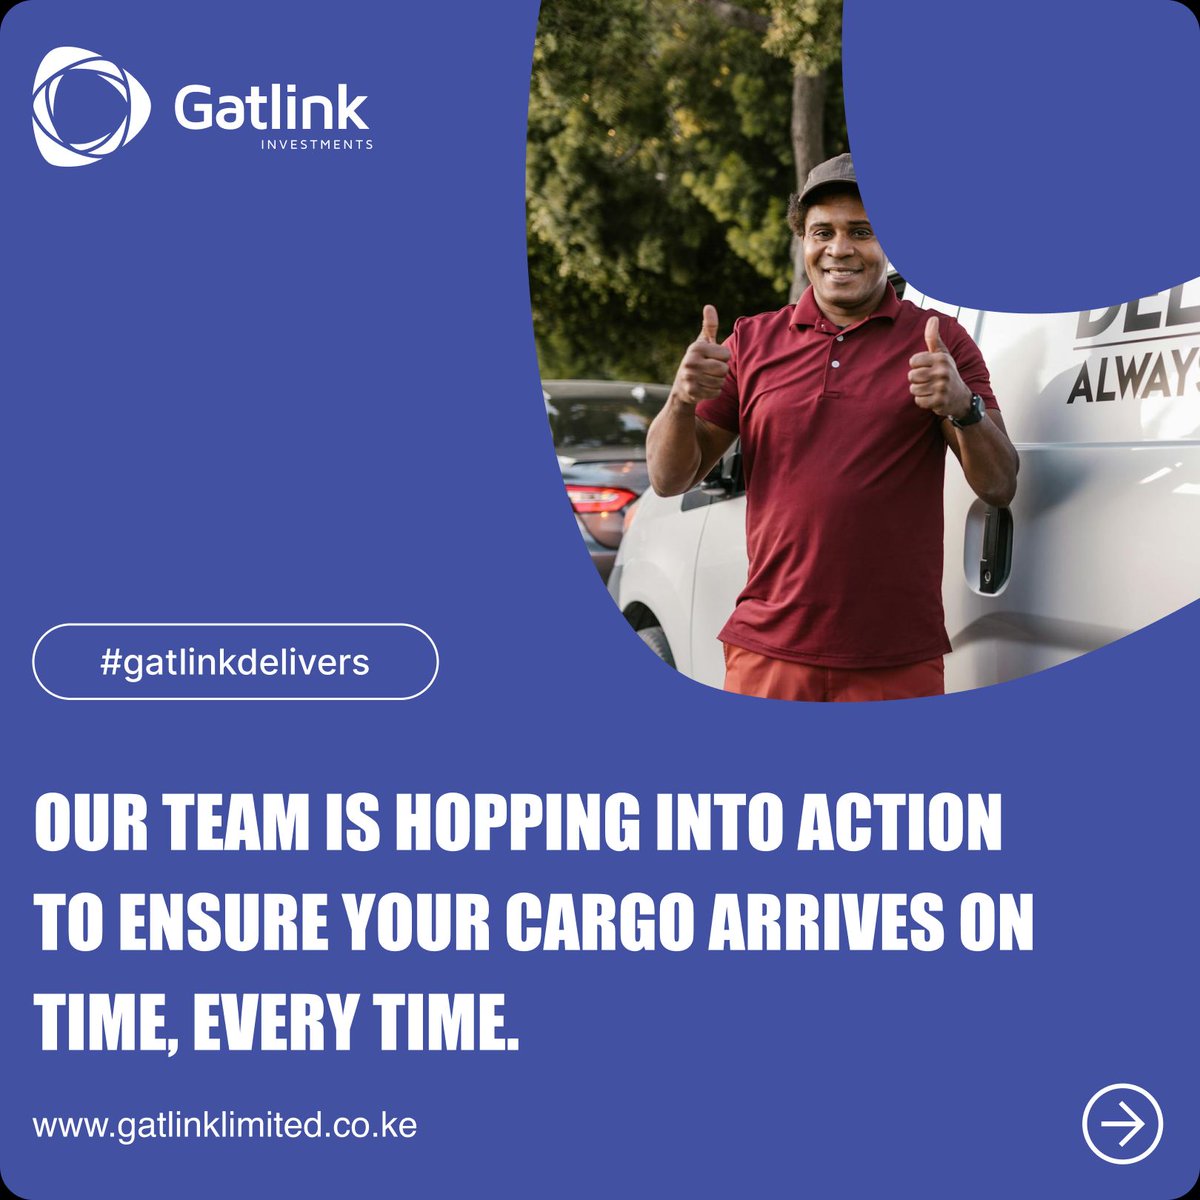 A Freight Forwarder with years of experience will know how to handle your goods so that they reach their destination safely.

We are all about minimum risks, talk to us info@gatlinkinvestments.co.ke

#gatlinkinvestments #seacargoshipping #freightservices #kenya #rwanda #drcongo'